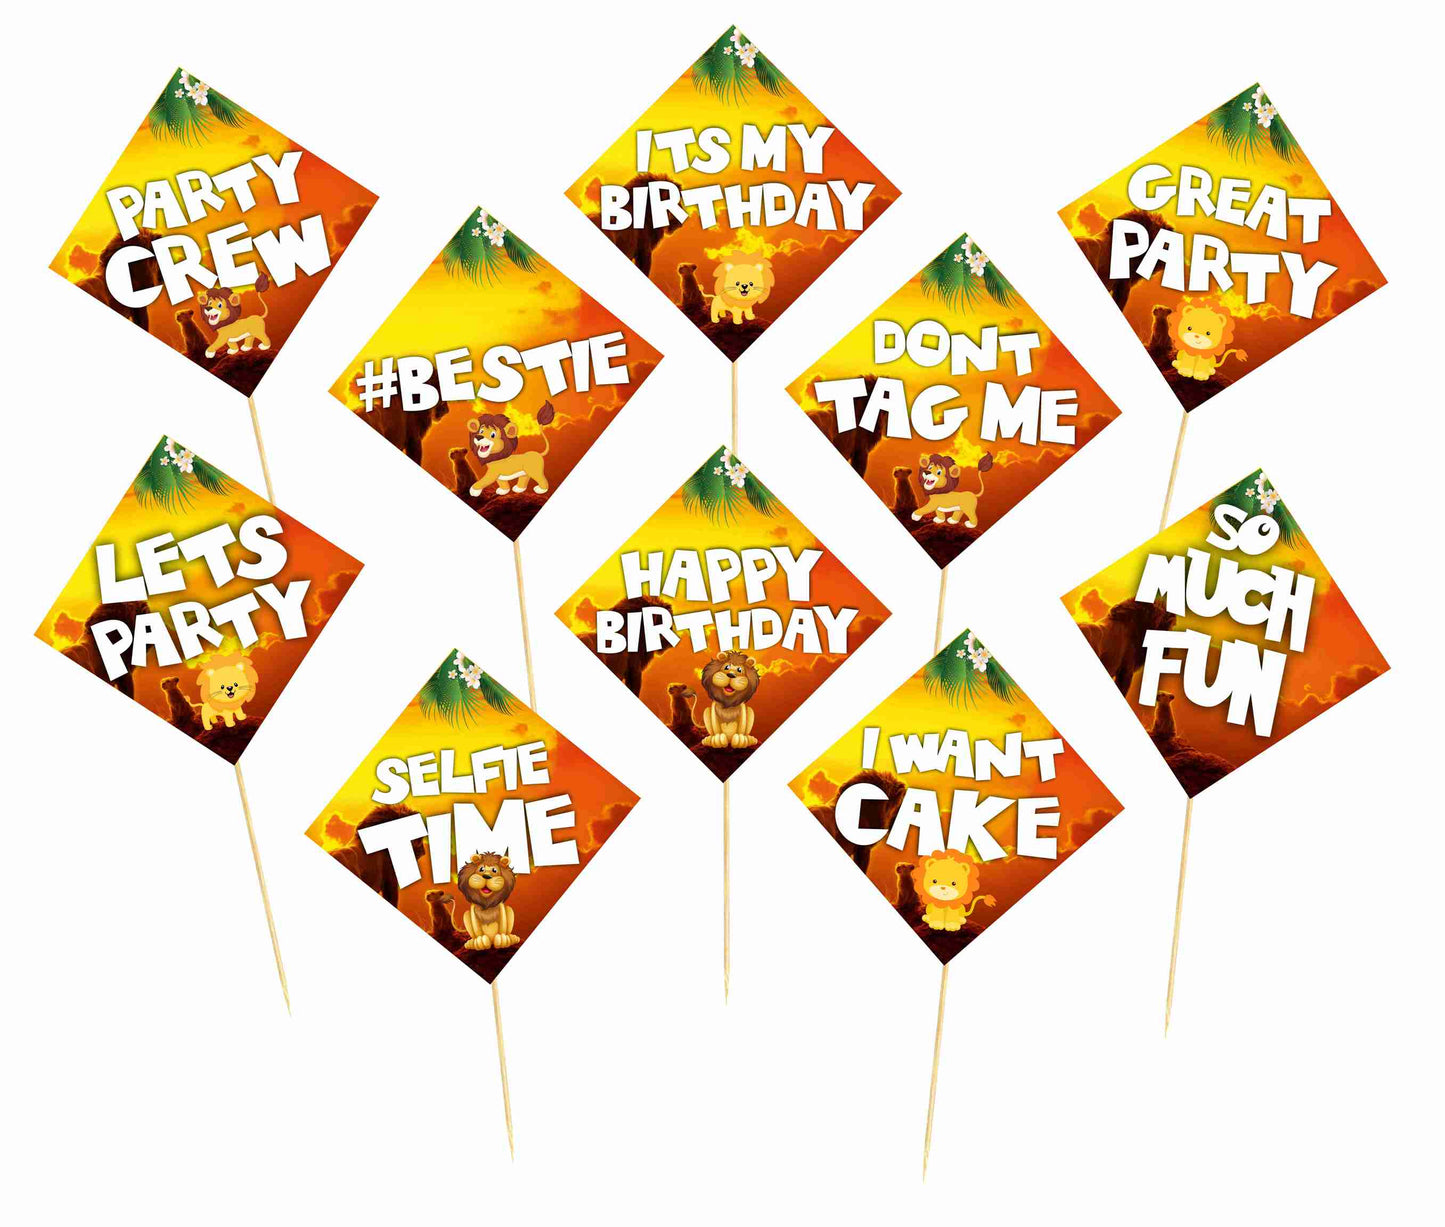 Lion Birthday Photo Booth Party Props Theme Birthday Party Decoration, Birthday Photo Booth Party Item for Adults and Kids